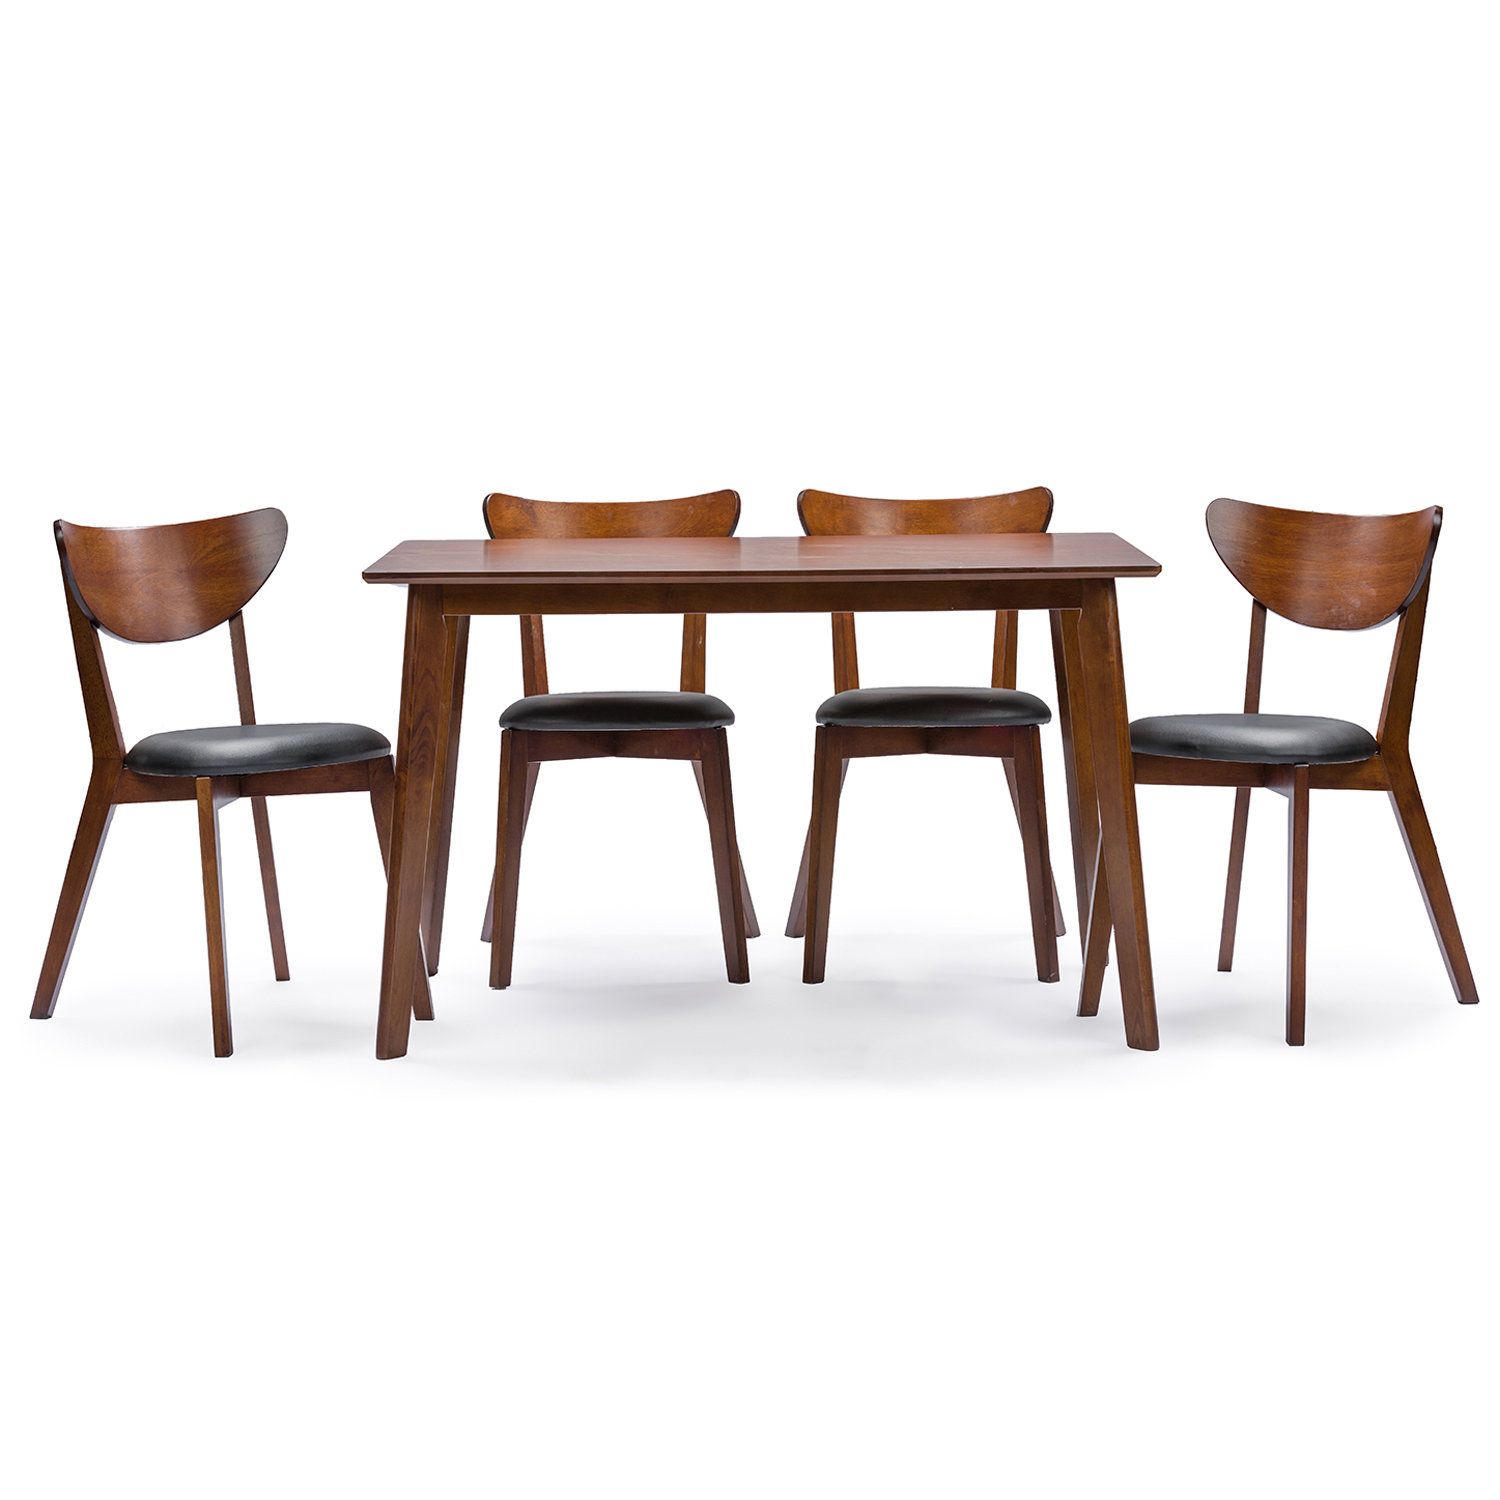 Joss & Main Throughout Most Recent Tejeda 5 Piece Dining Sets (View 10 of 20)